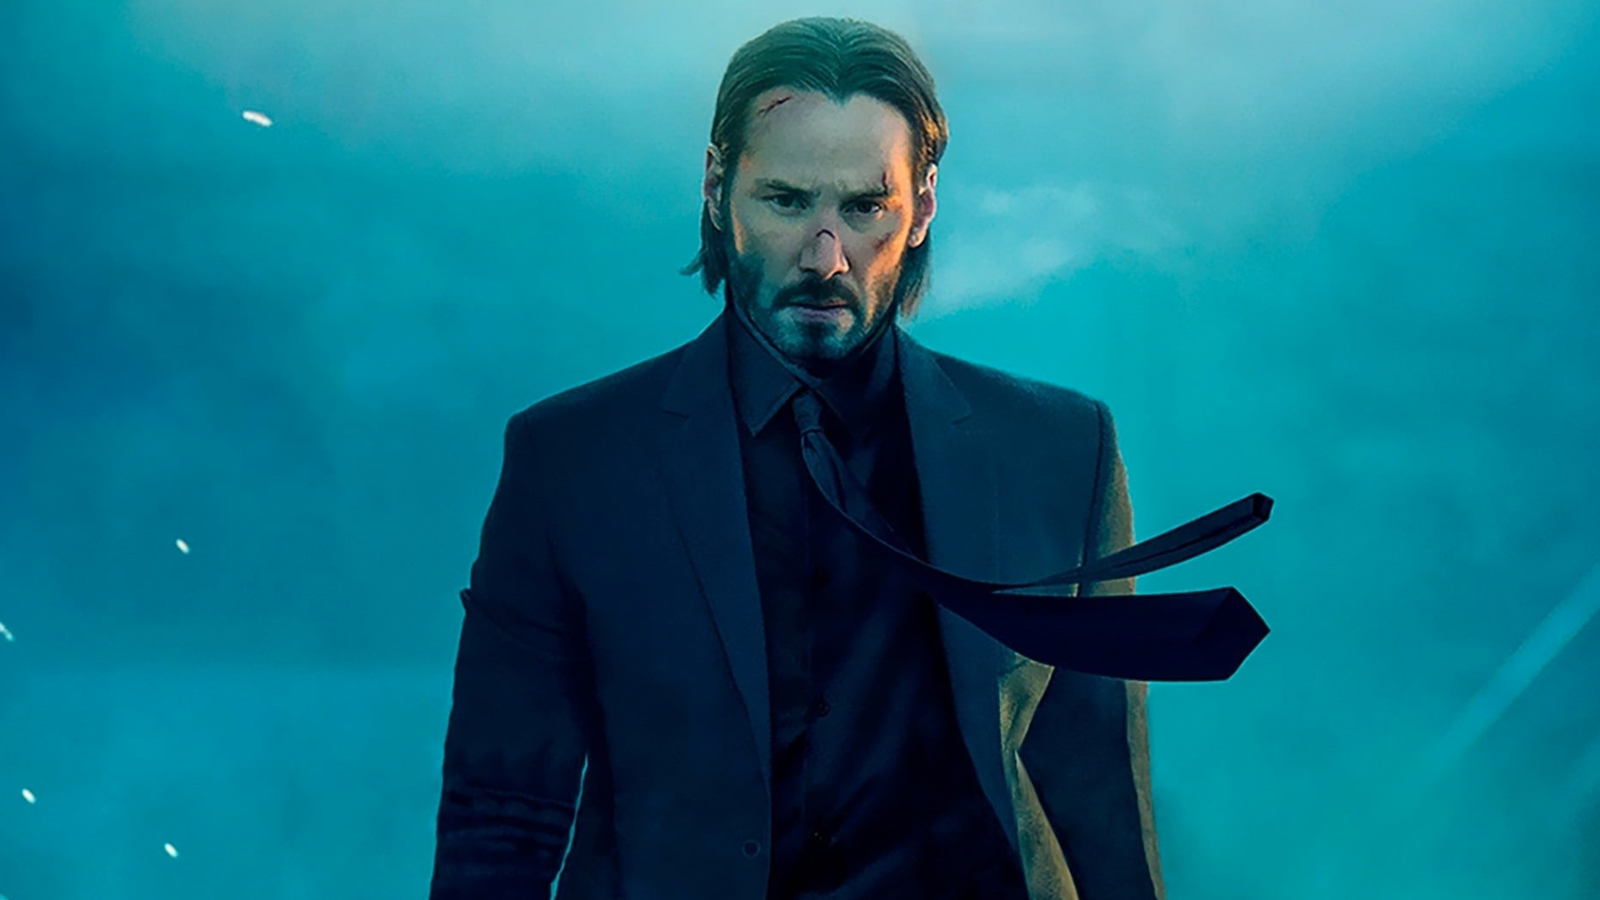 John Wick Was Almost Played By Someone Other Than Keanu Reeves